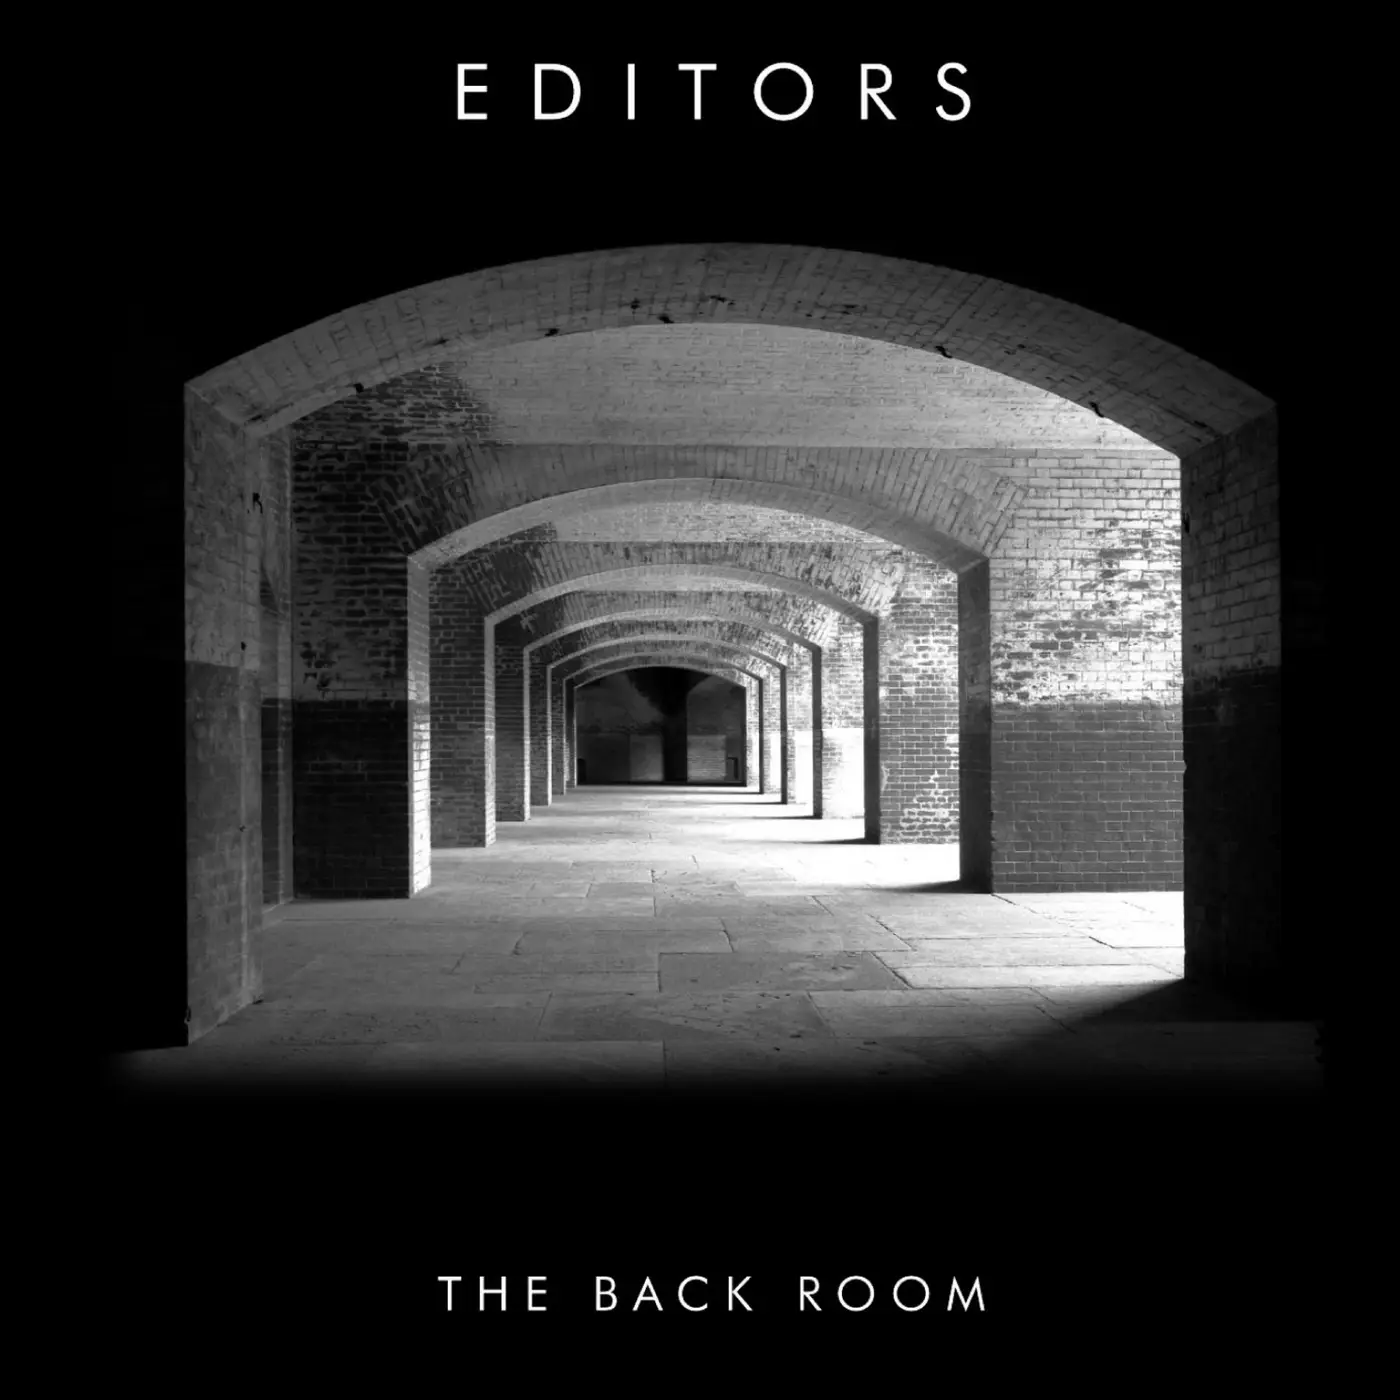 <strong>Editors - The Back Room</strong> (Vinyl LP - clear)